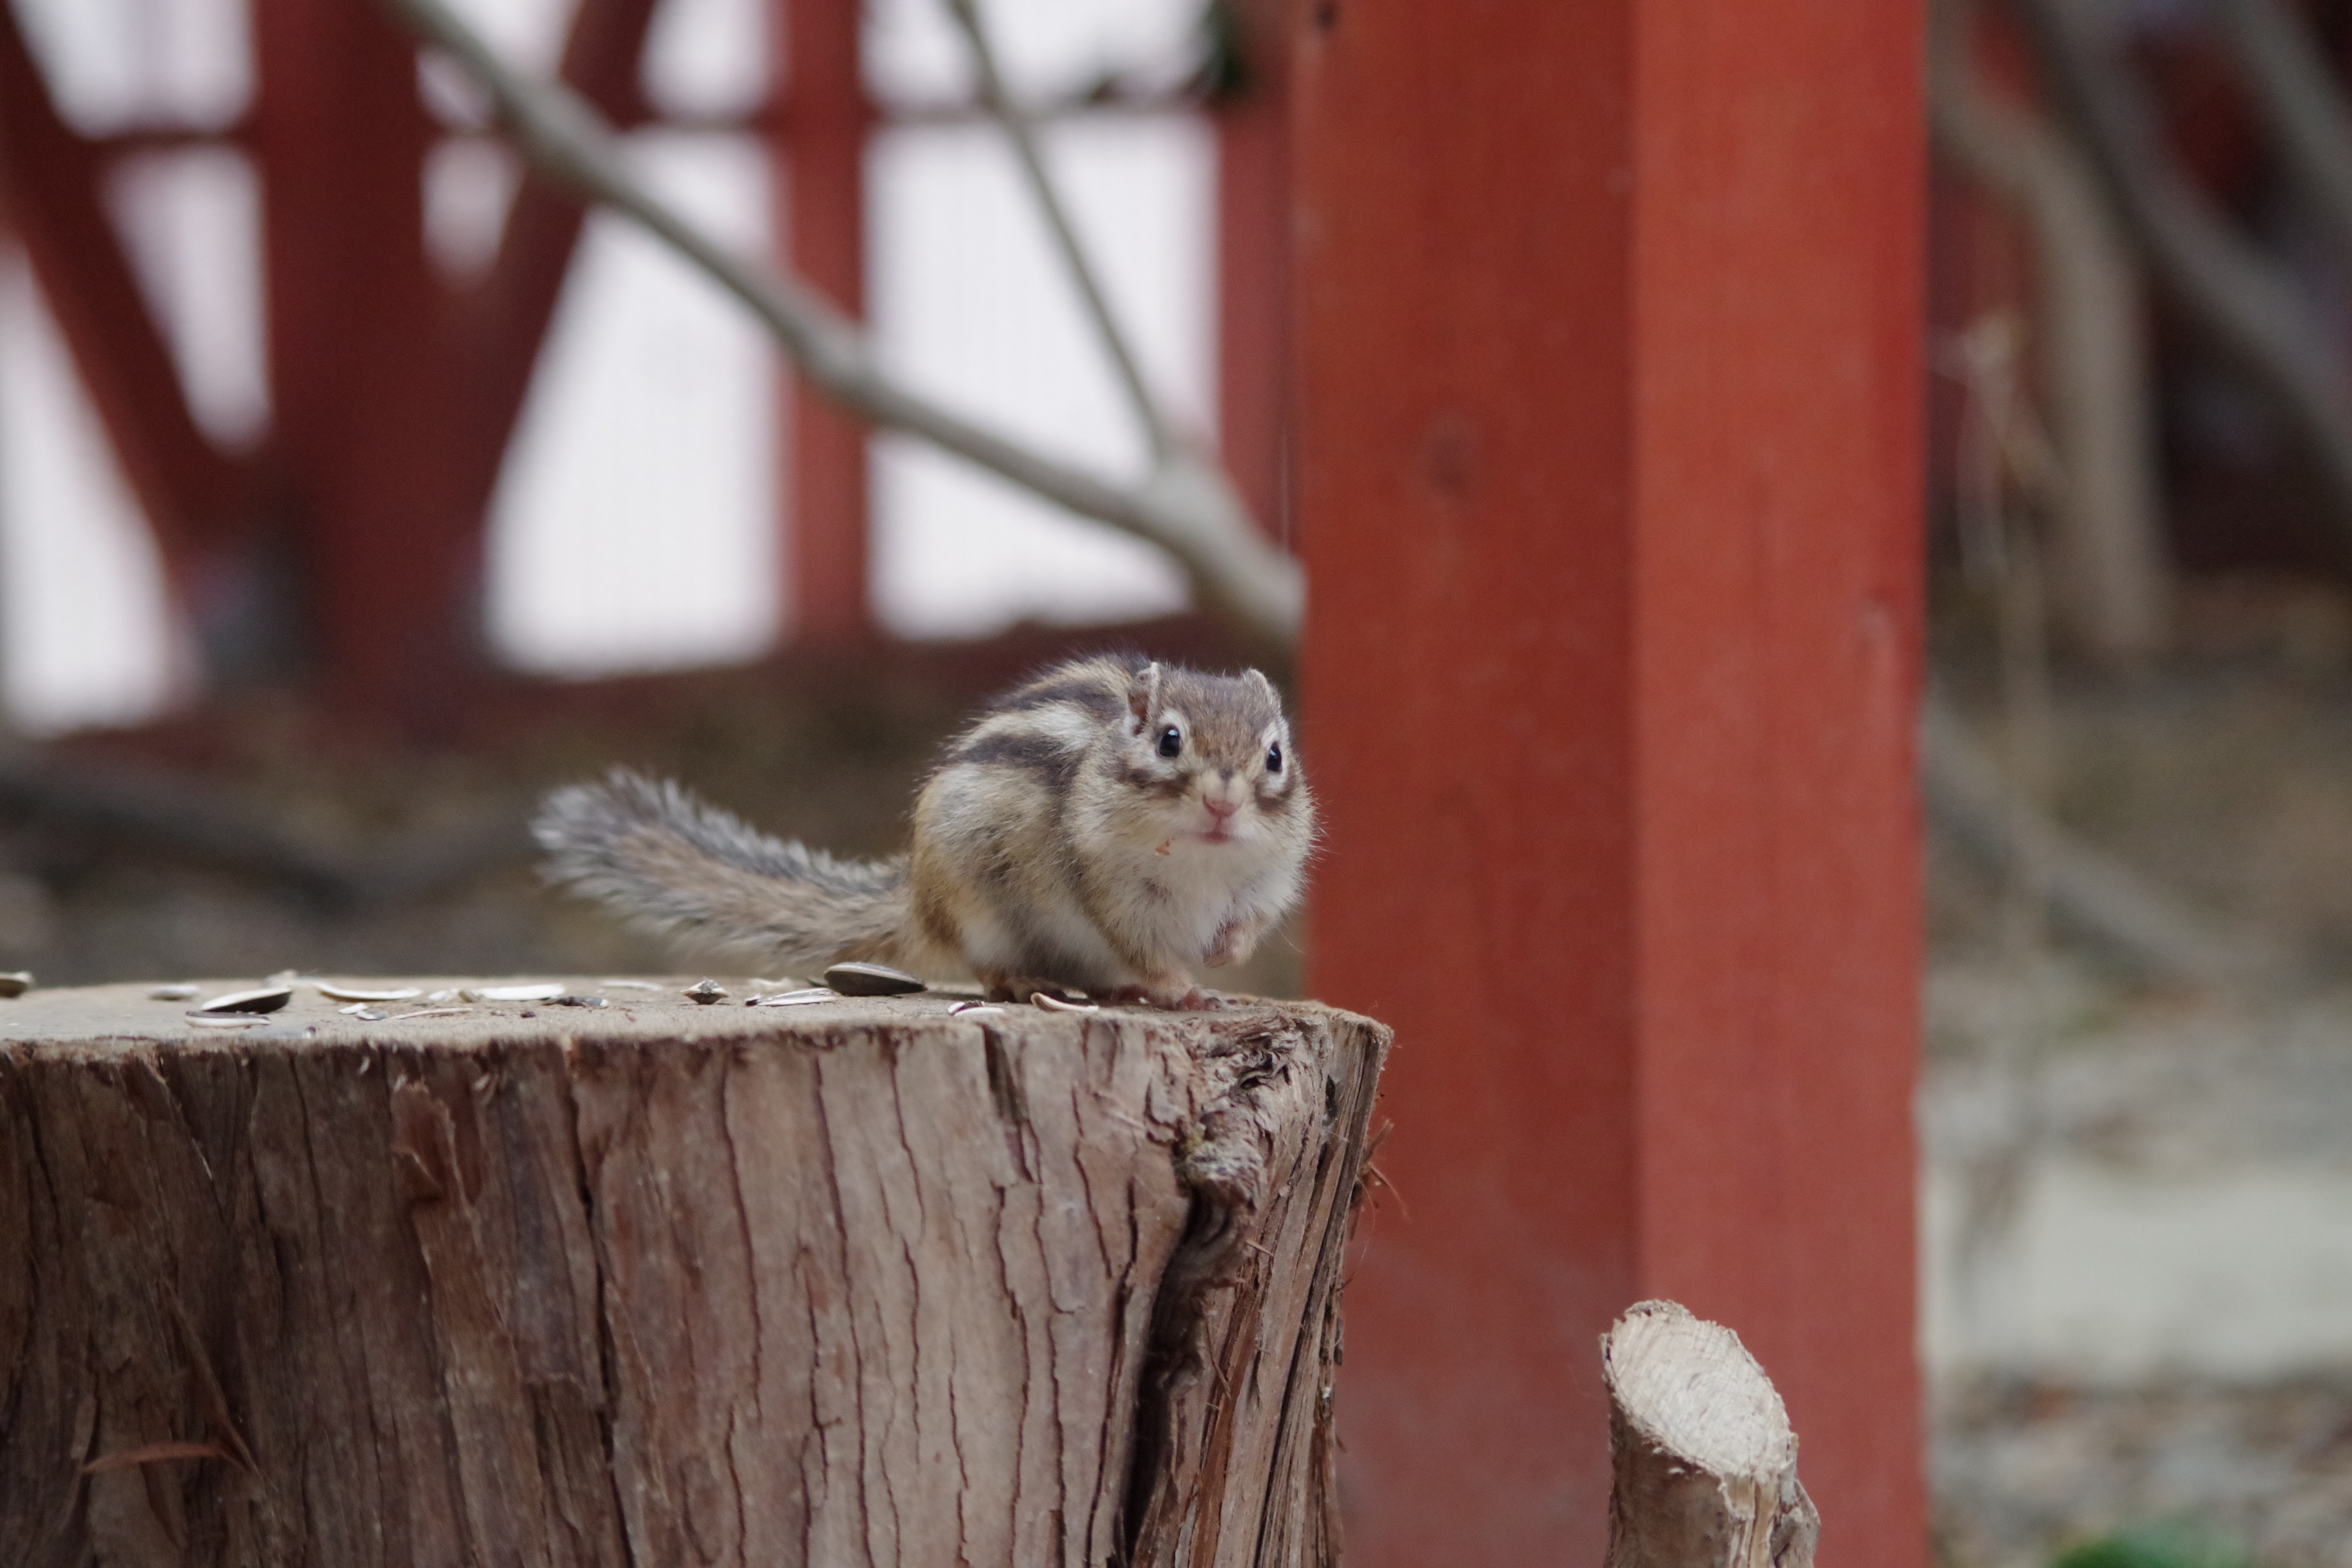 Wood, Woods, Mountain, Natural, Squirrel, one animal, animal themes